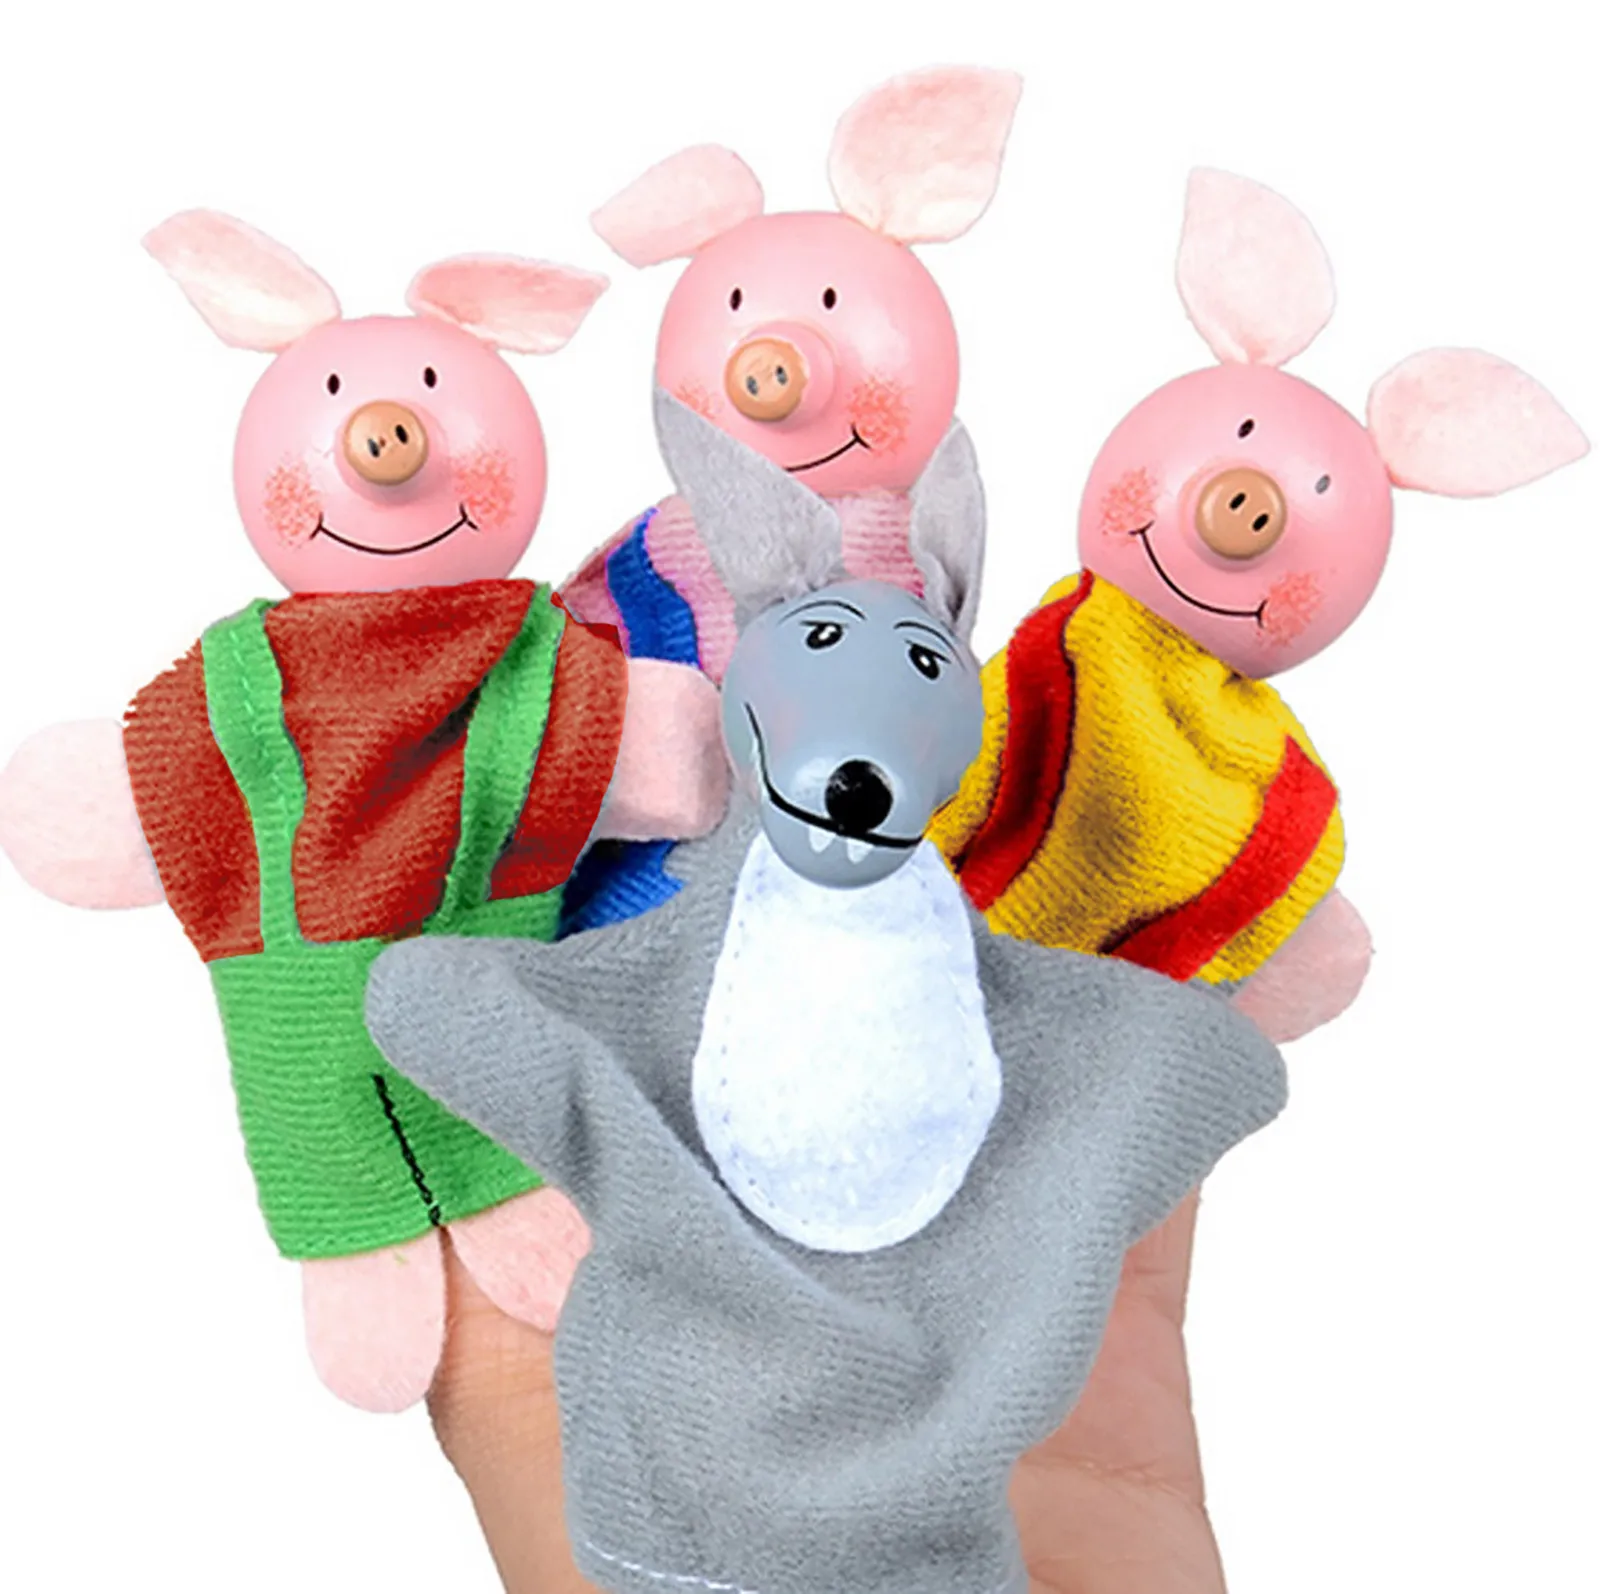 

4 Pcs Plush Three Little Pigs And Wolf Kids Hand Puppets Children Tell Story Toys Finger Puppets High-quality Gifts Gadgets